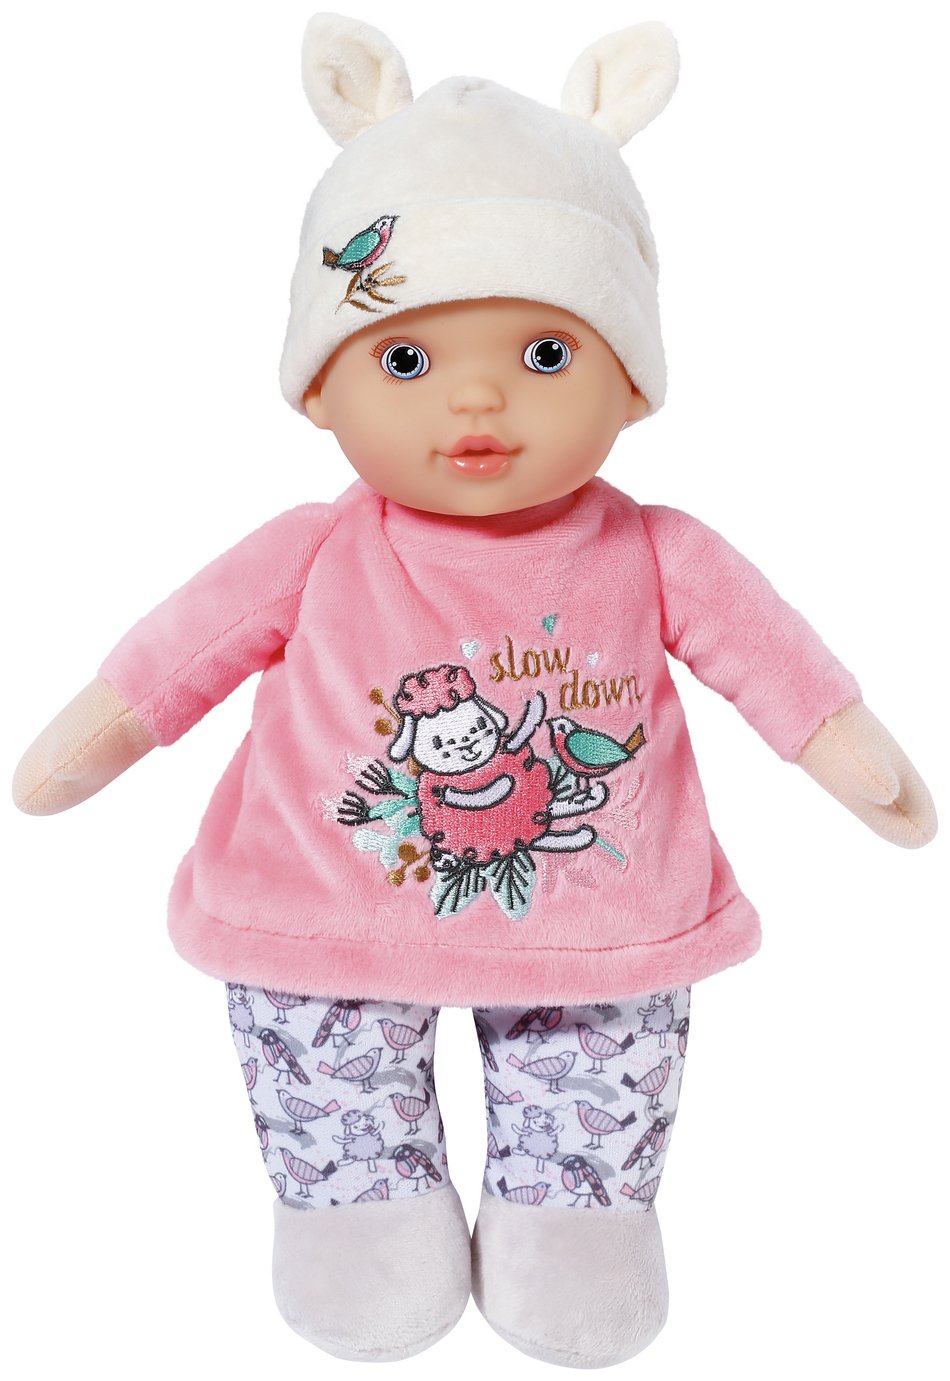 Baby Annabell Sweetie for Babies Doll - 12inch/30cm